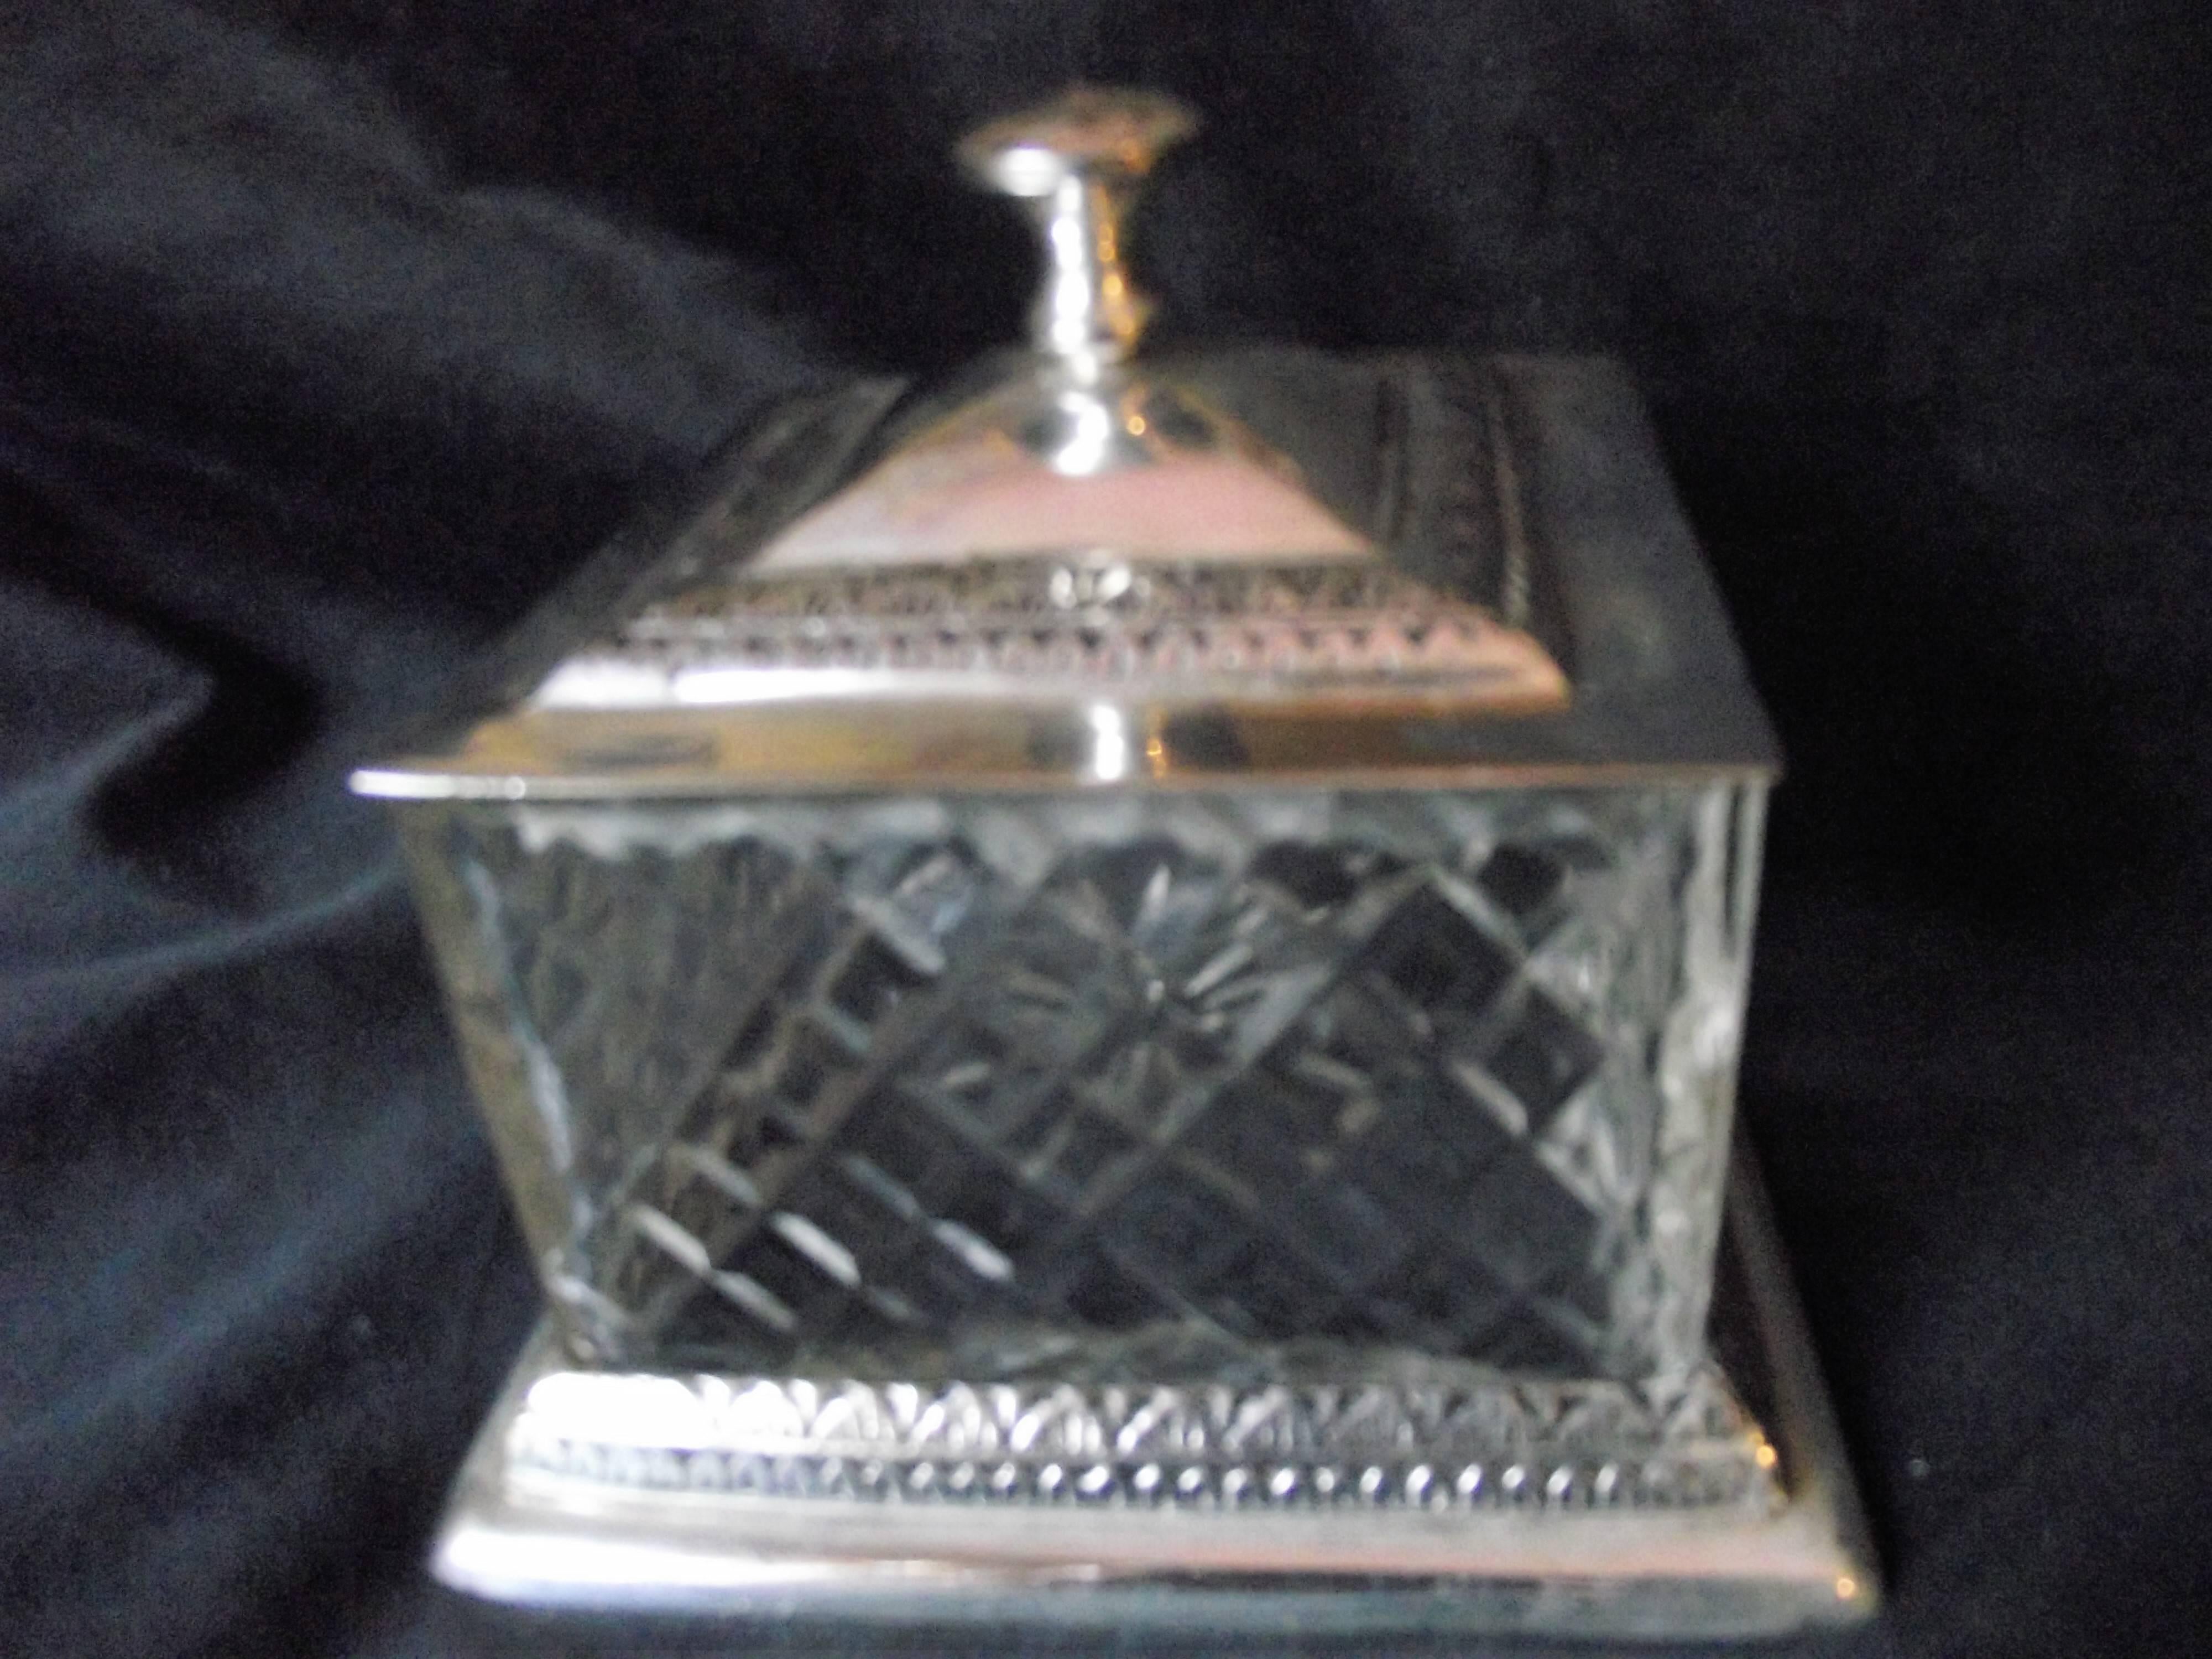 This little box is very elegant! It's pressed glass sides and bottom are very decorative and has no chips or cracks. The silver plate base is in near perfect condition. The silver plate lid has a few dings commensurate with it's age and use. All